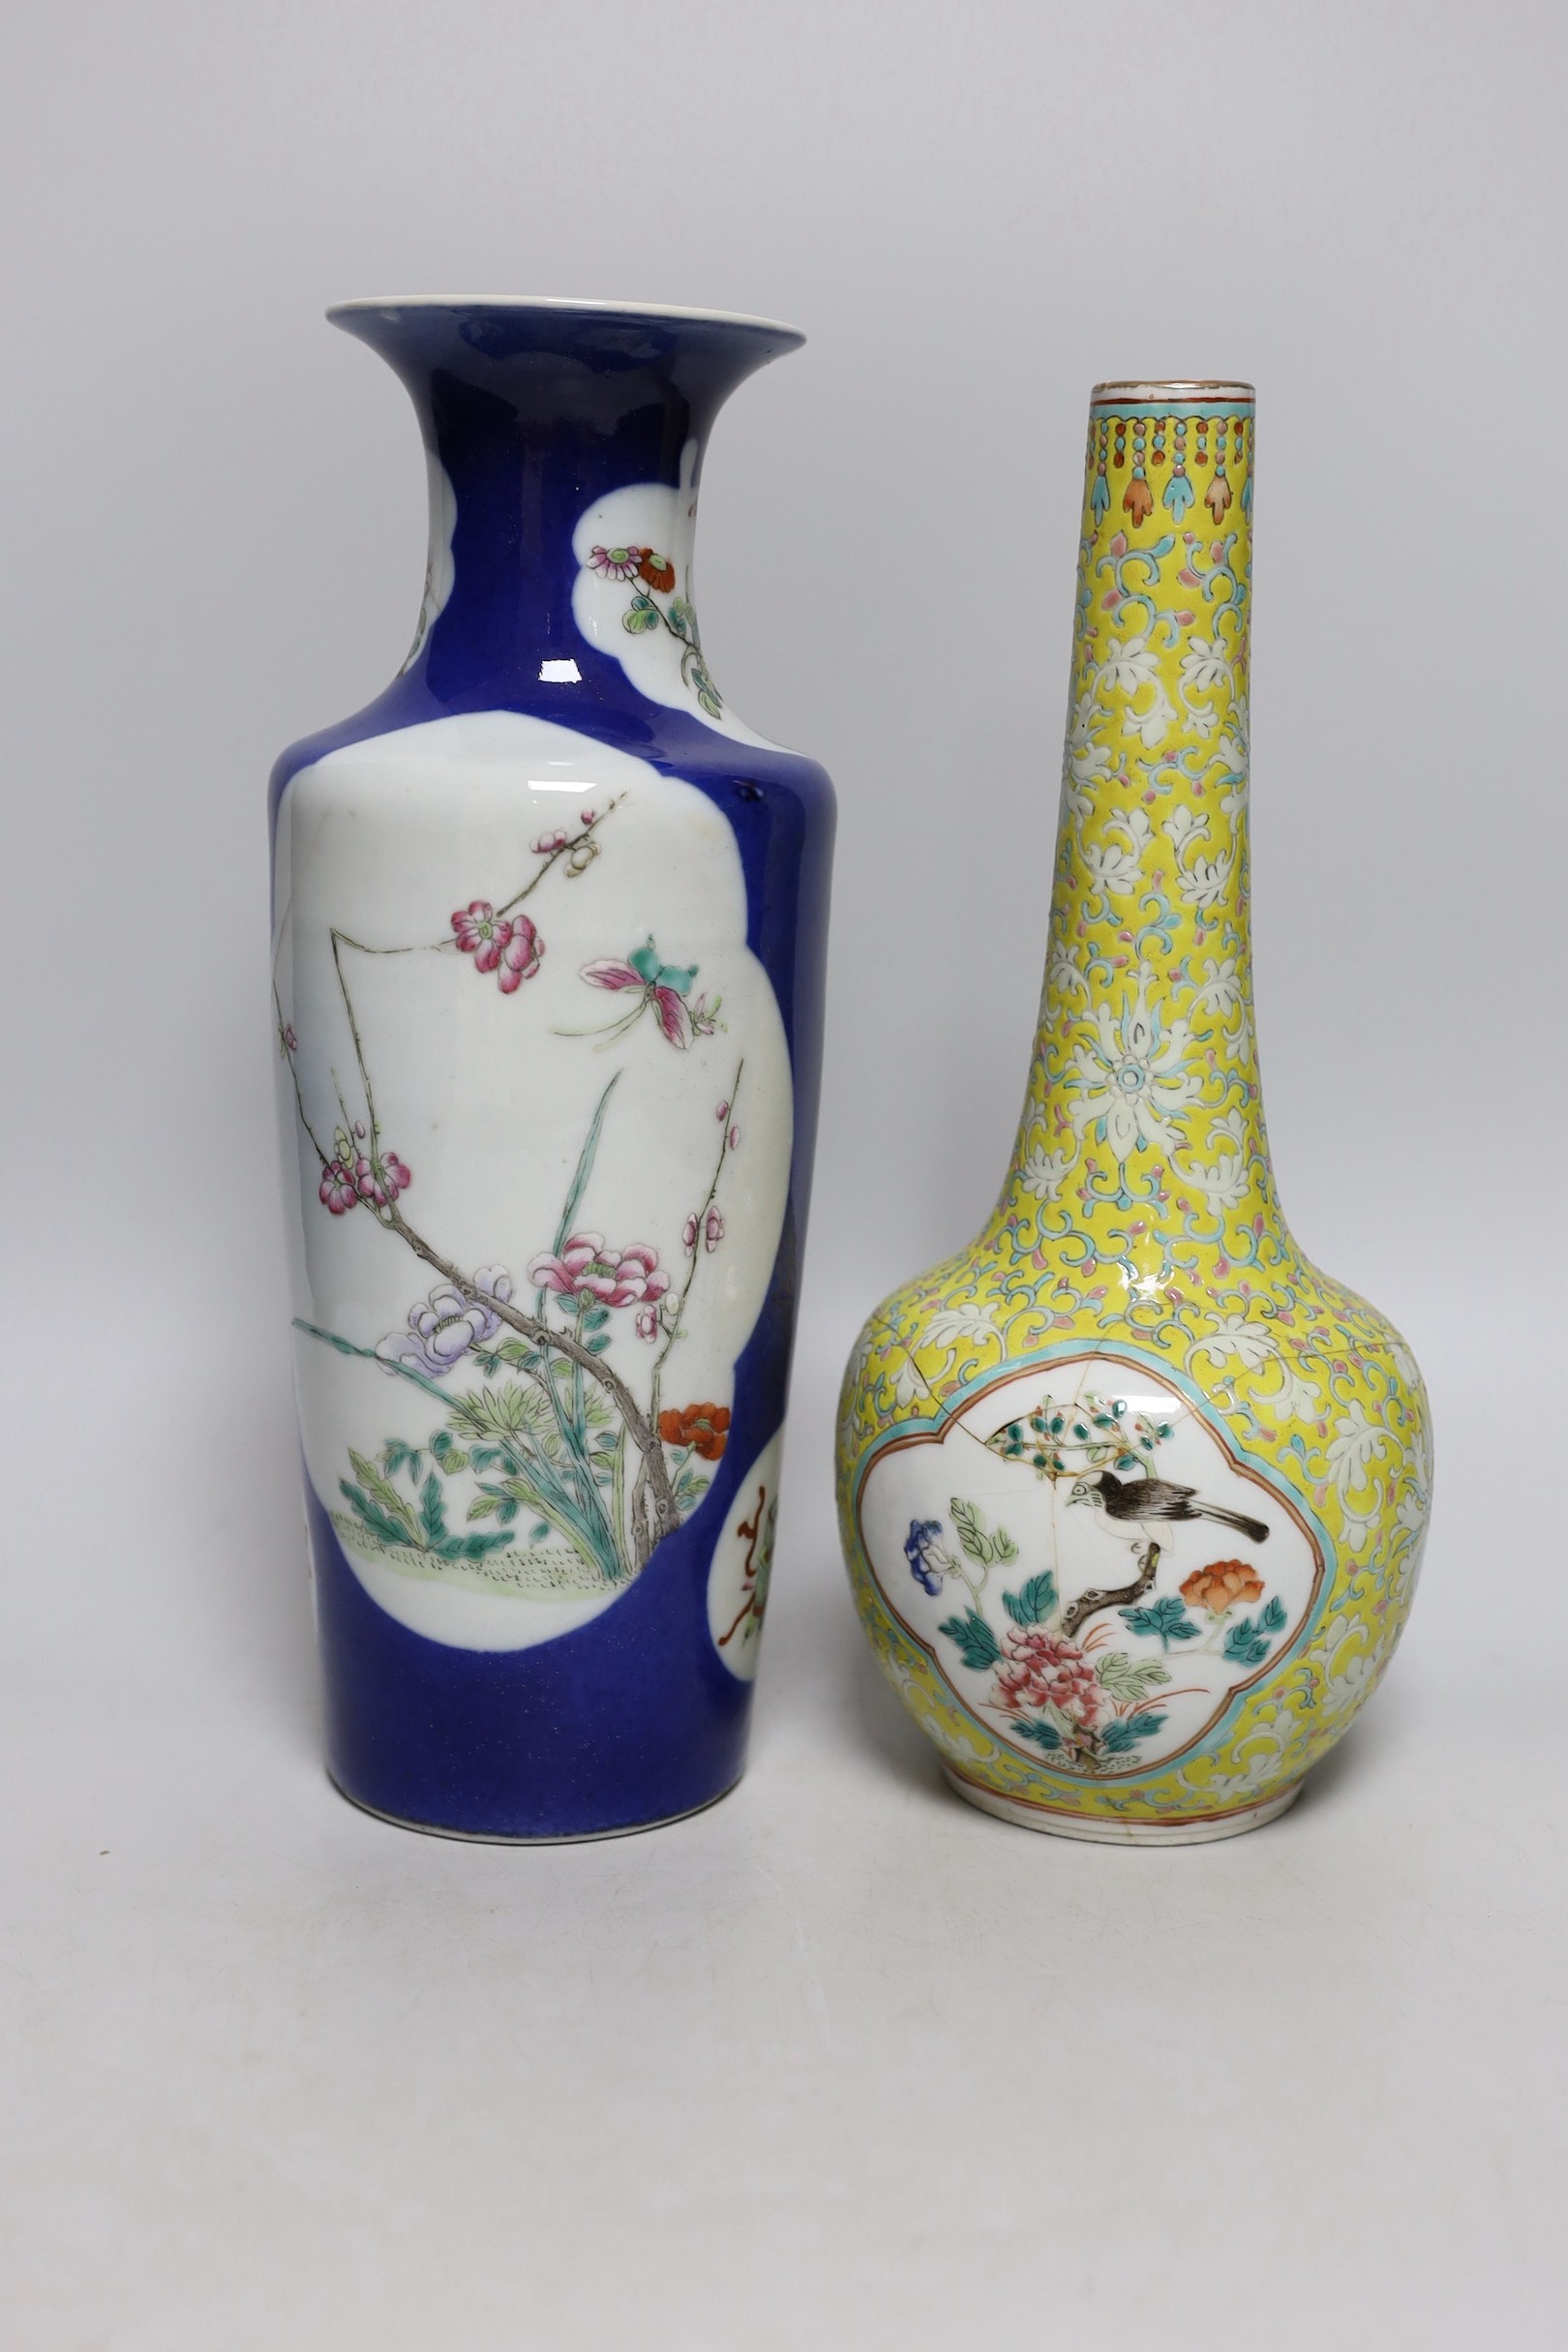 Two late 19th century Chinese porcelain vases, 31cm high, a/f - Image 3 of 5